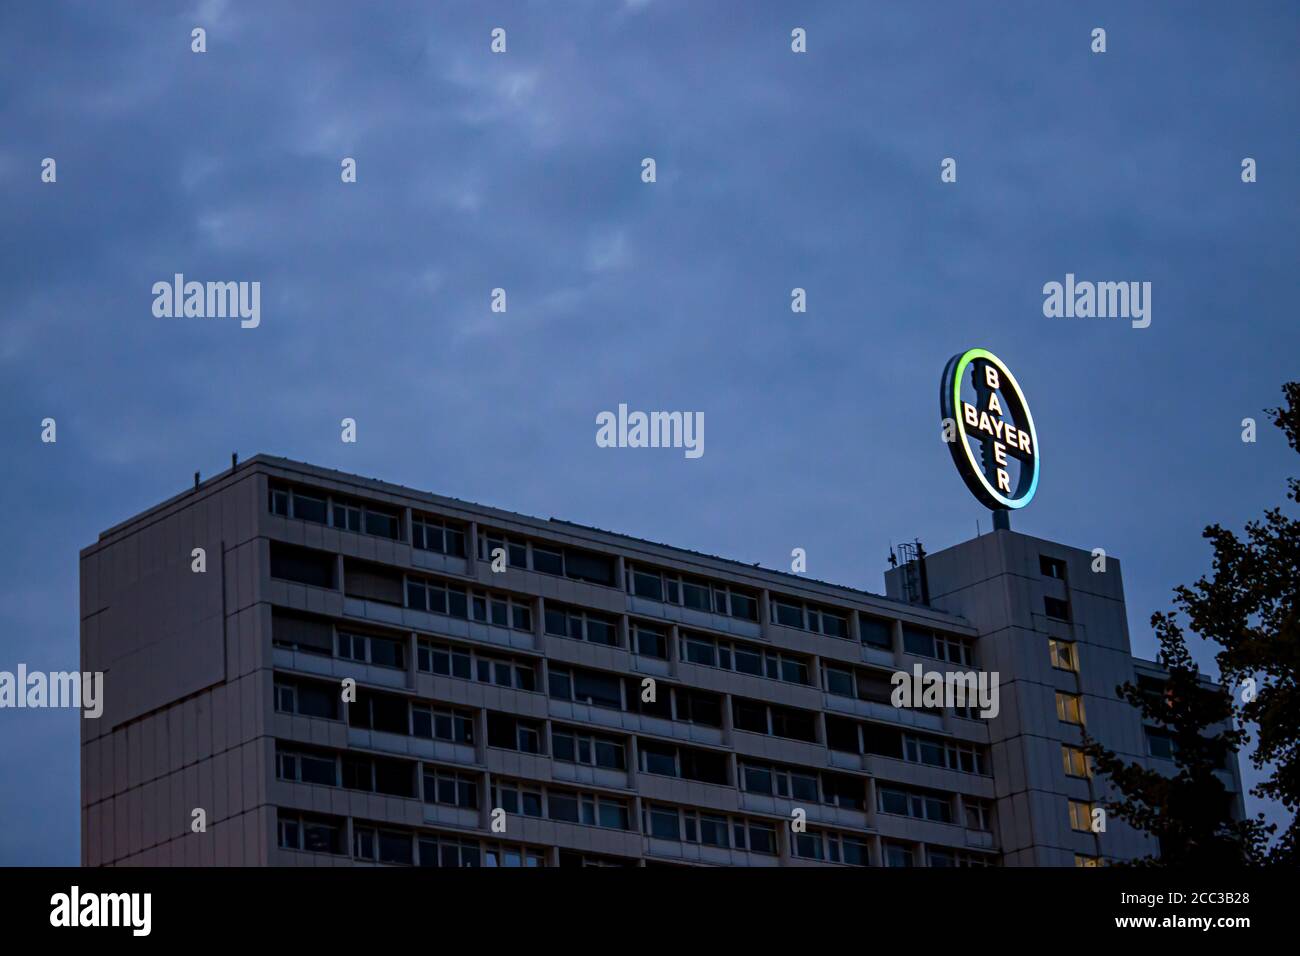 Berlin, Germany 09/14/2009:  isolated, night time view of the Bayer AG Pharma building with brand logo illuminated on top. Image also features silhoue Stock Photo